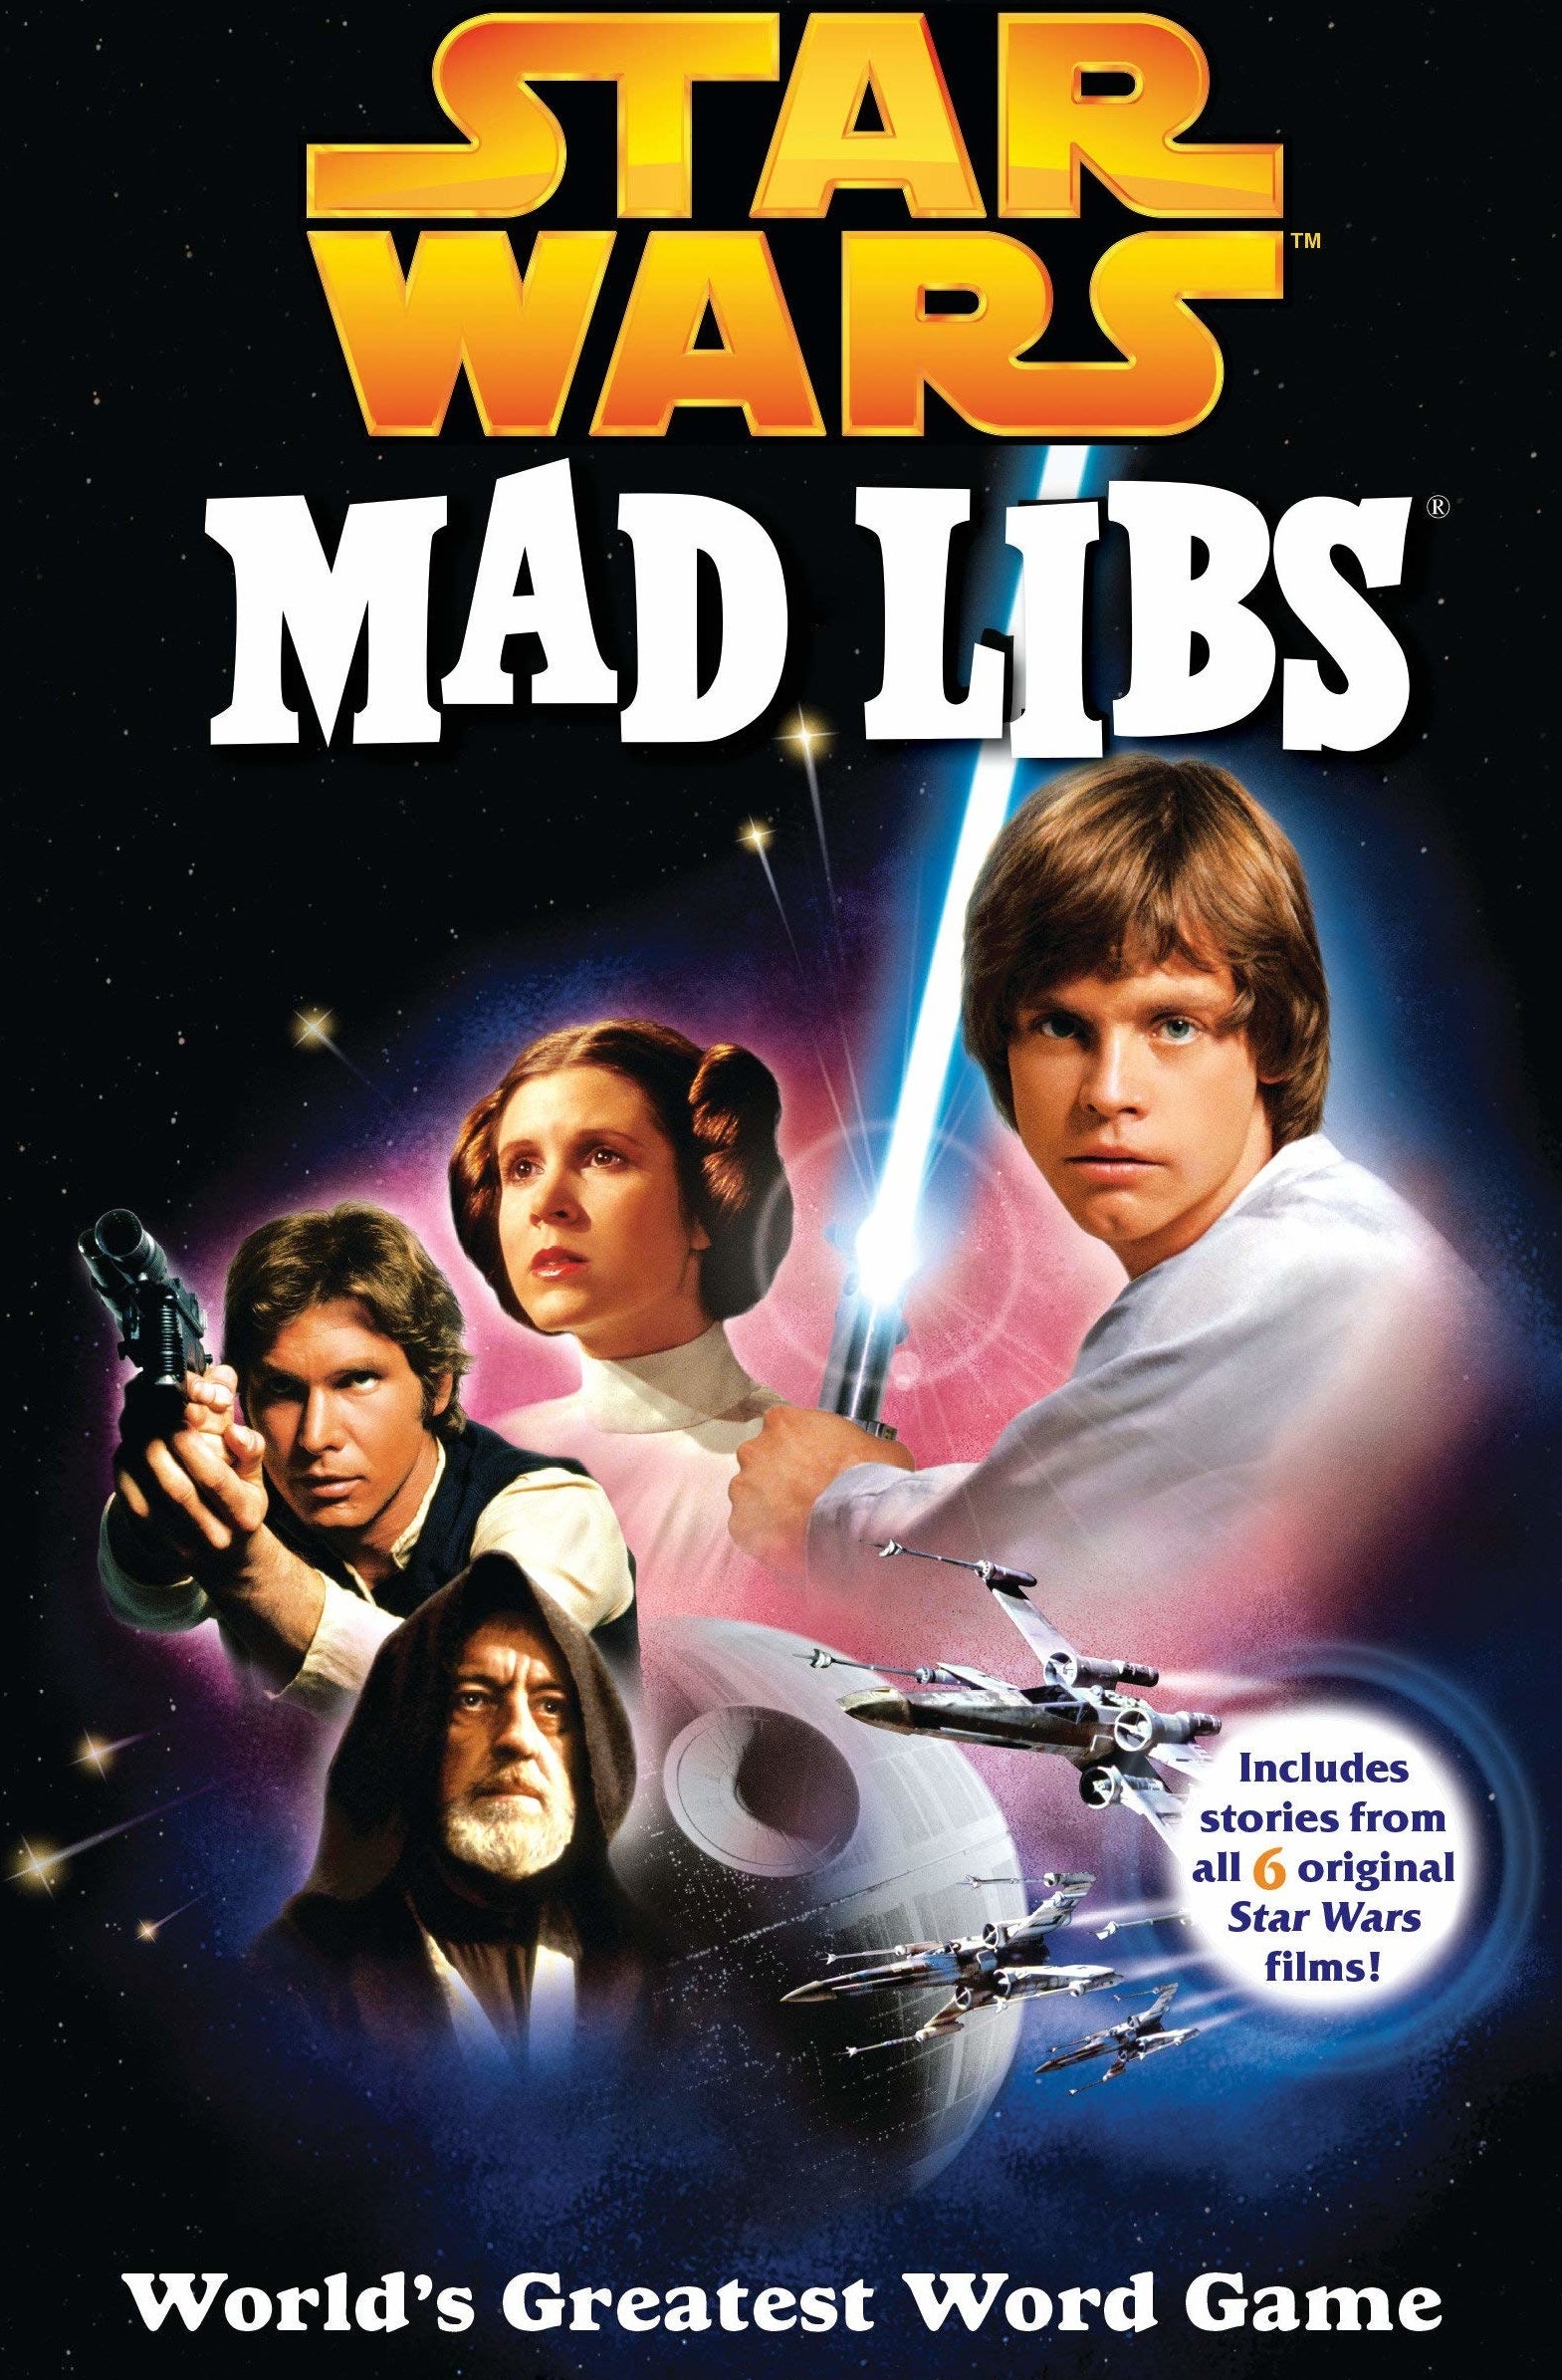 The cover of the Mad Libs book